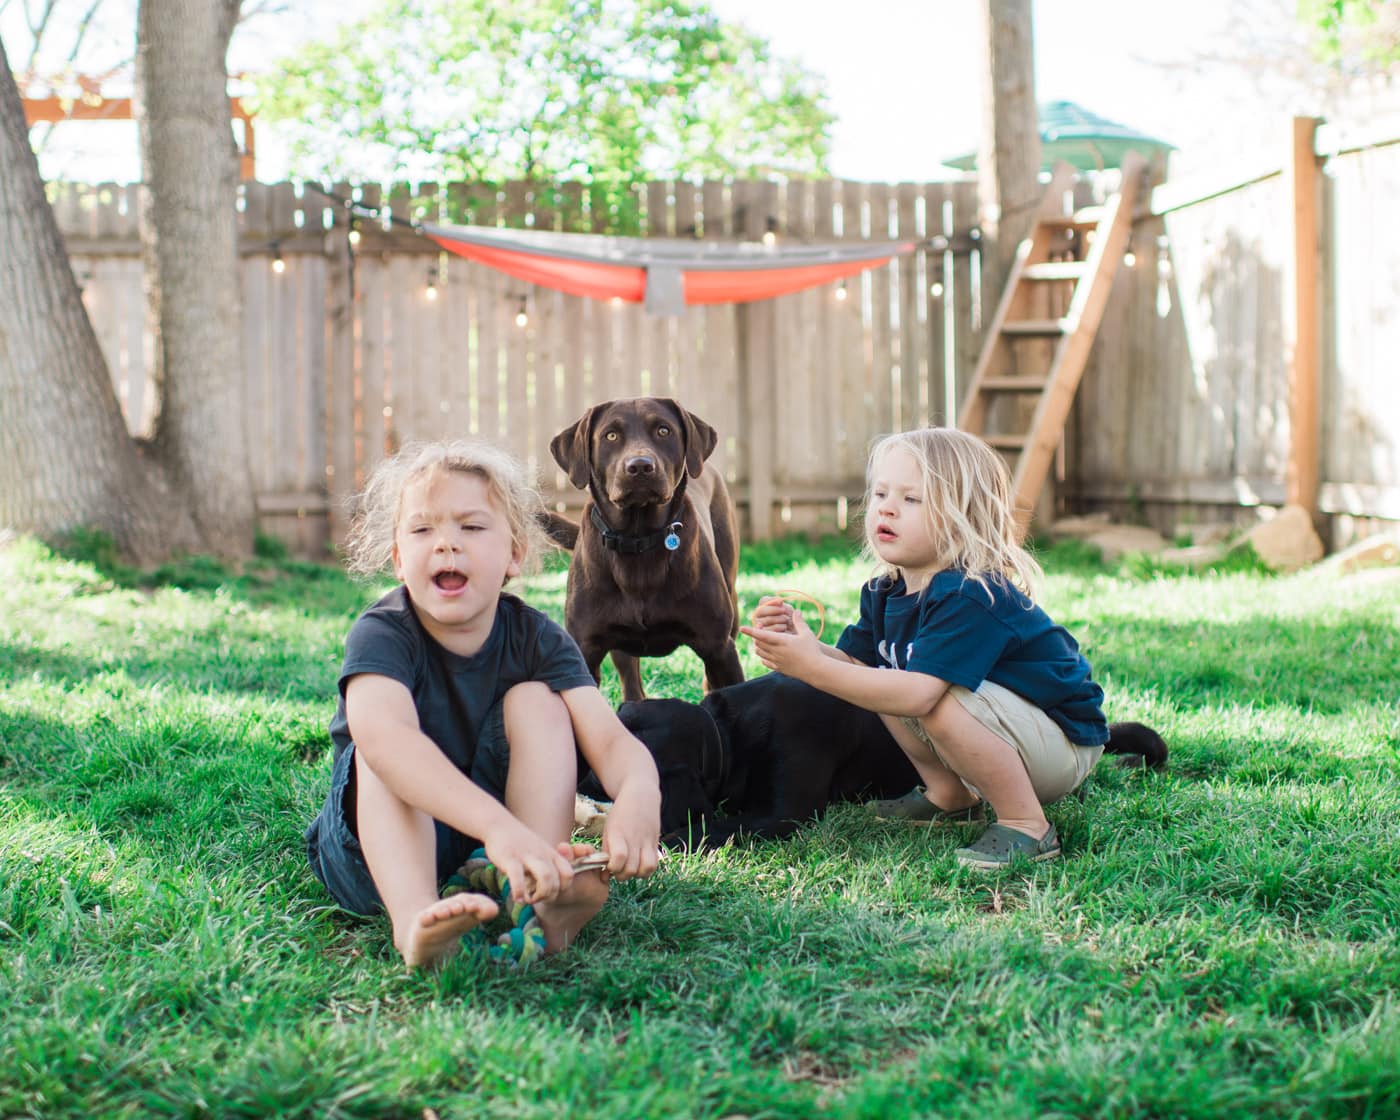 Kids playing with dogs